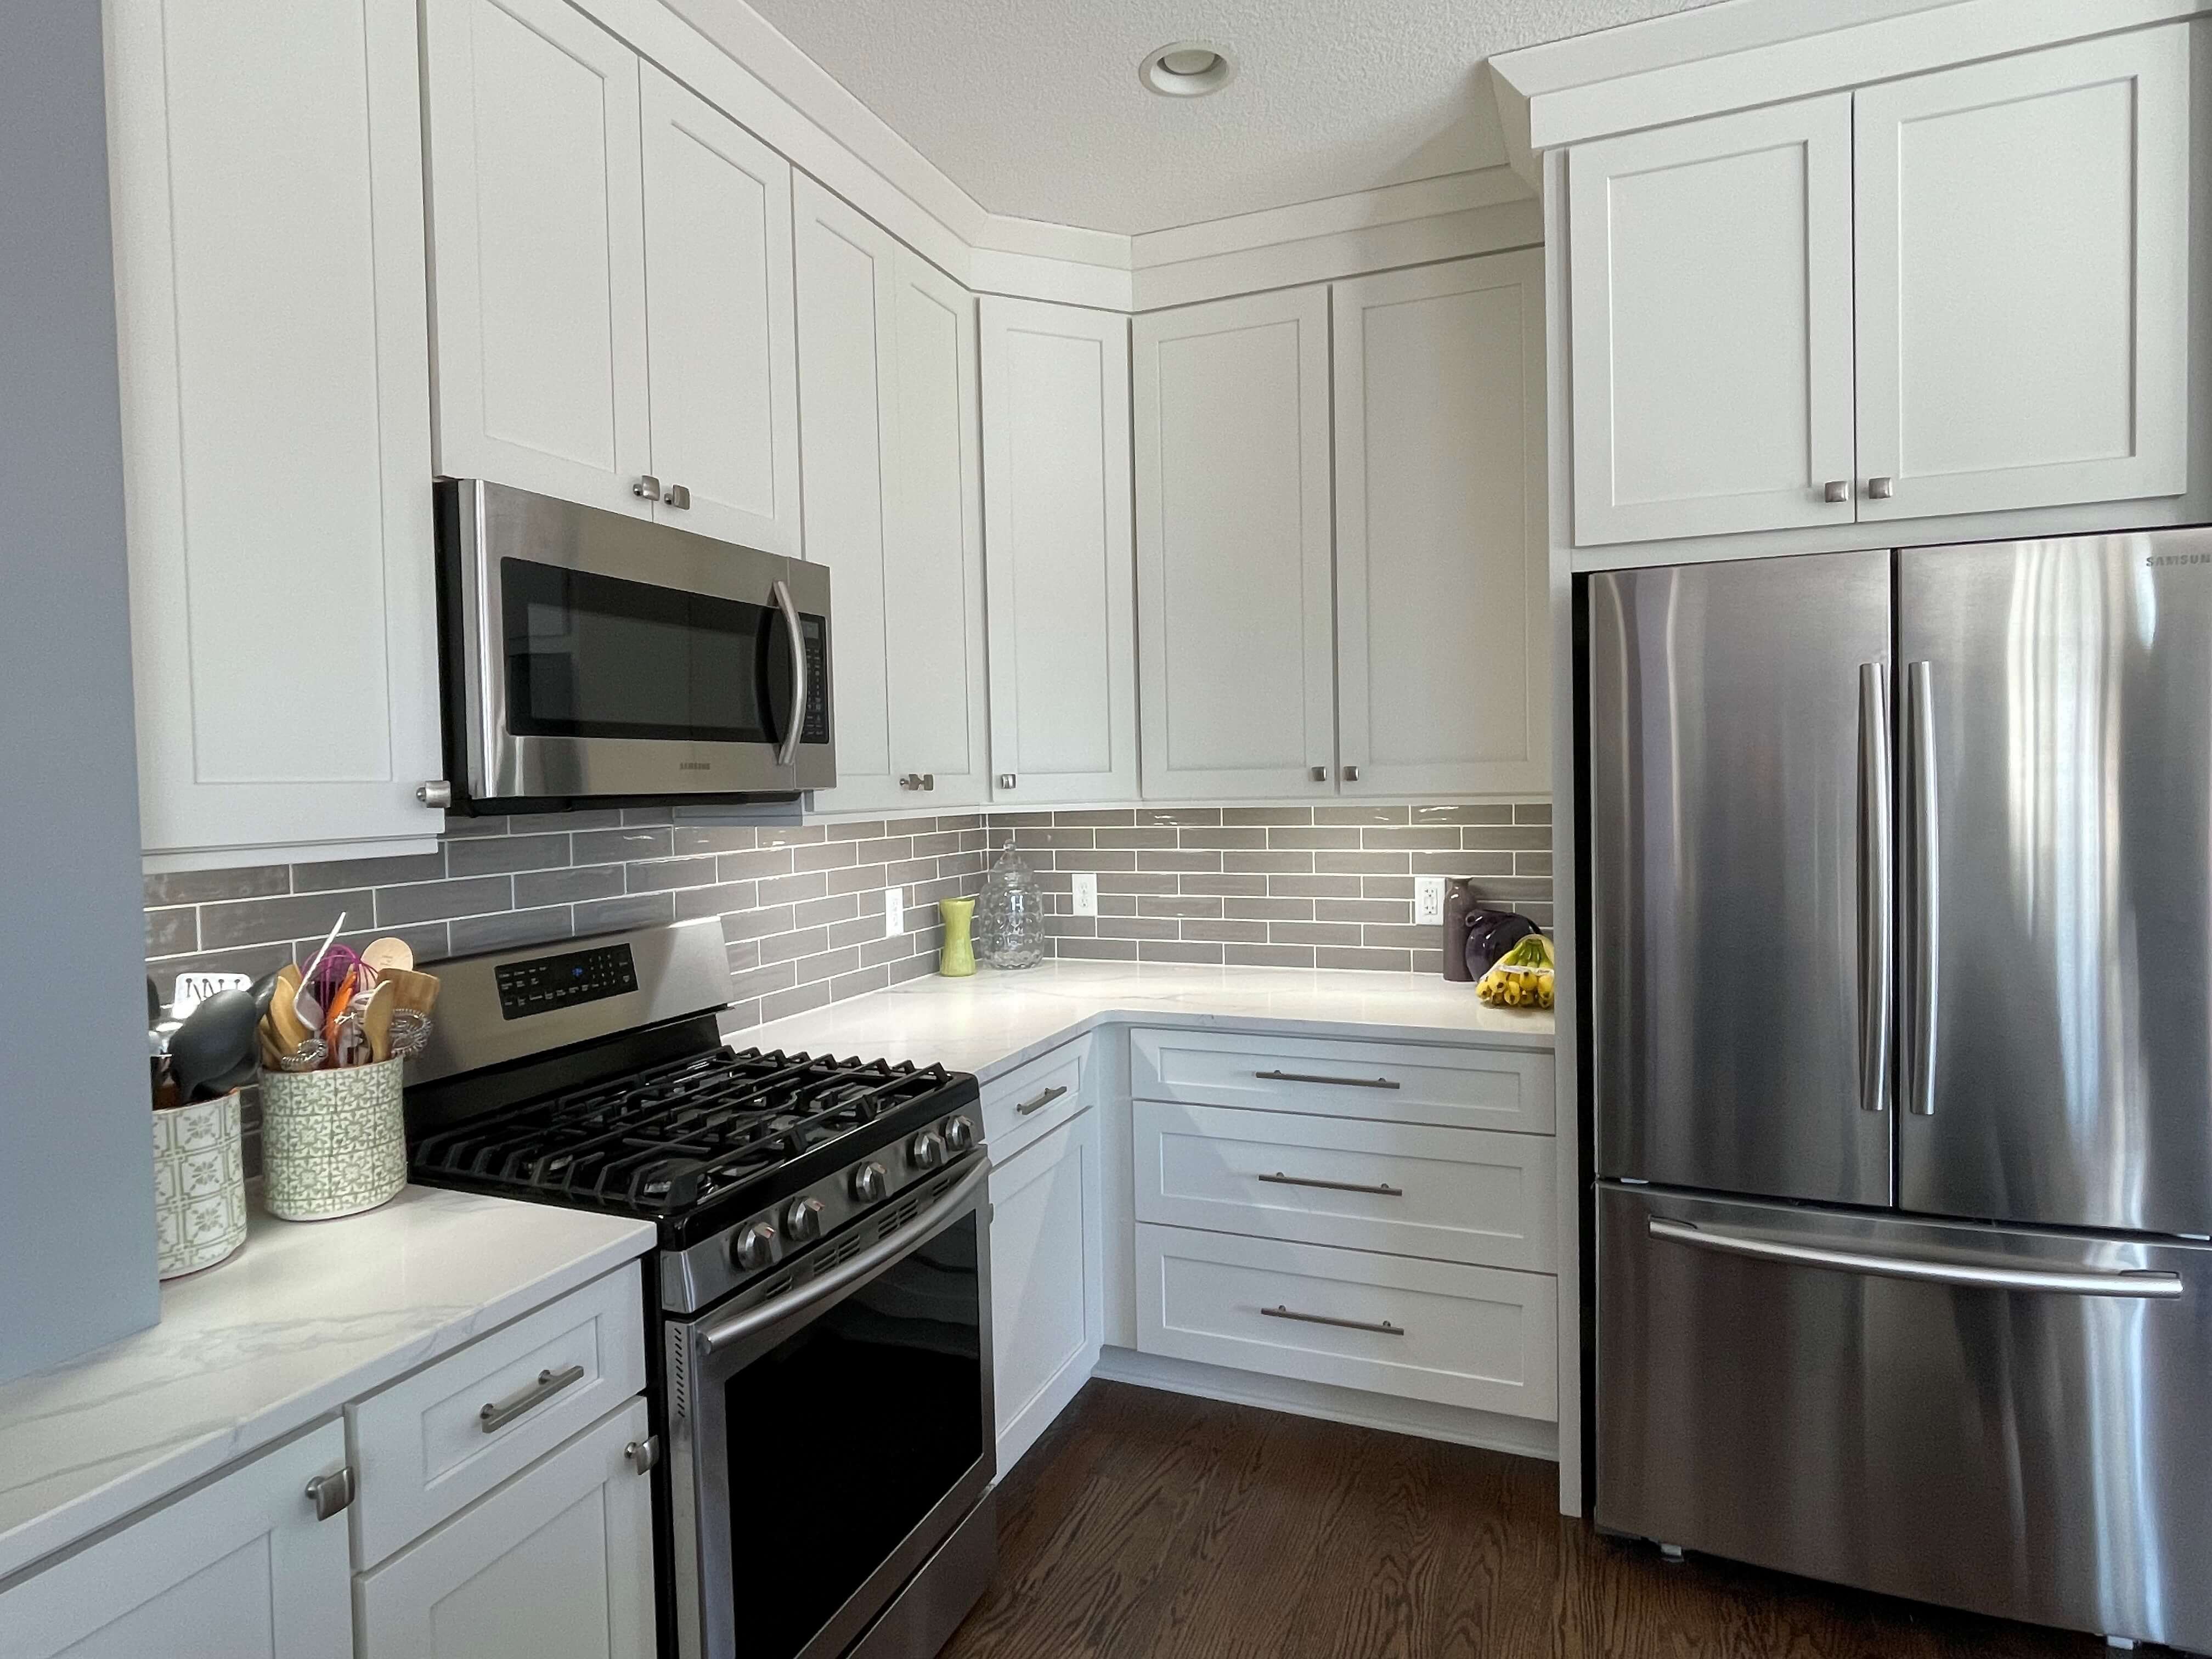 Remodel Stories: A Kitchen Update to Last Another 20 years - Dura ...